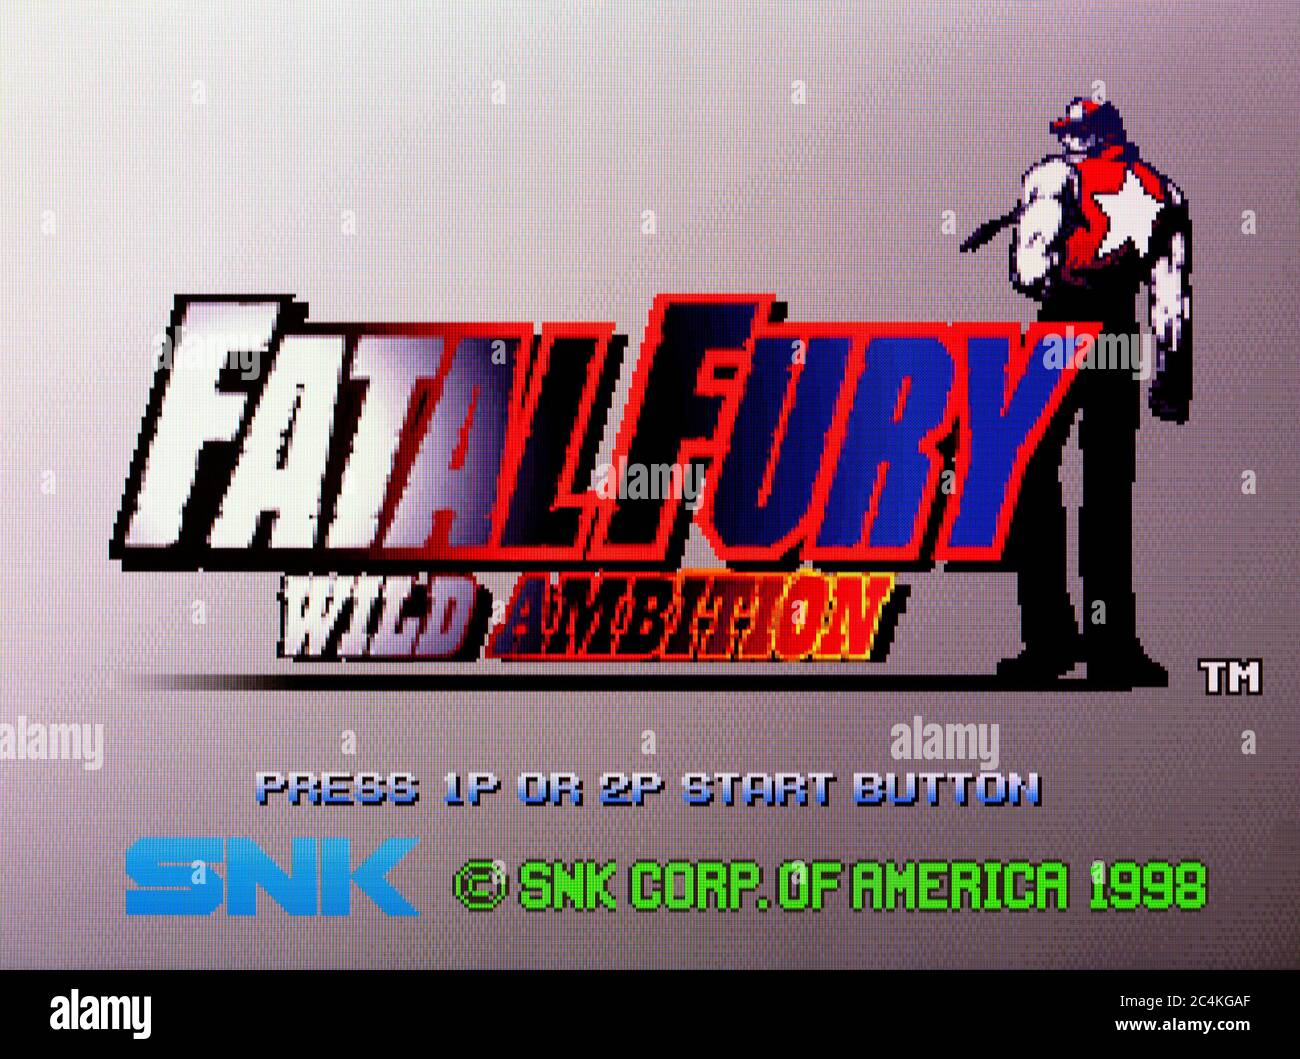 Fatal Fury Wild Ambition - Sony Playstation 1 PS1 PSX - Editorial